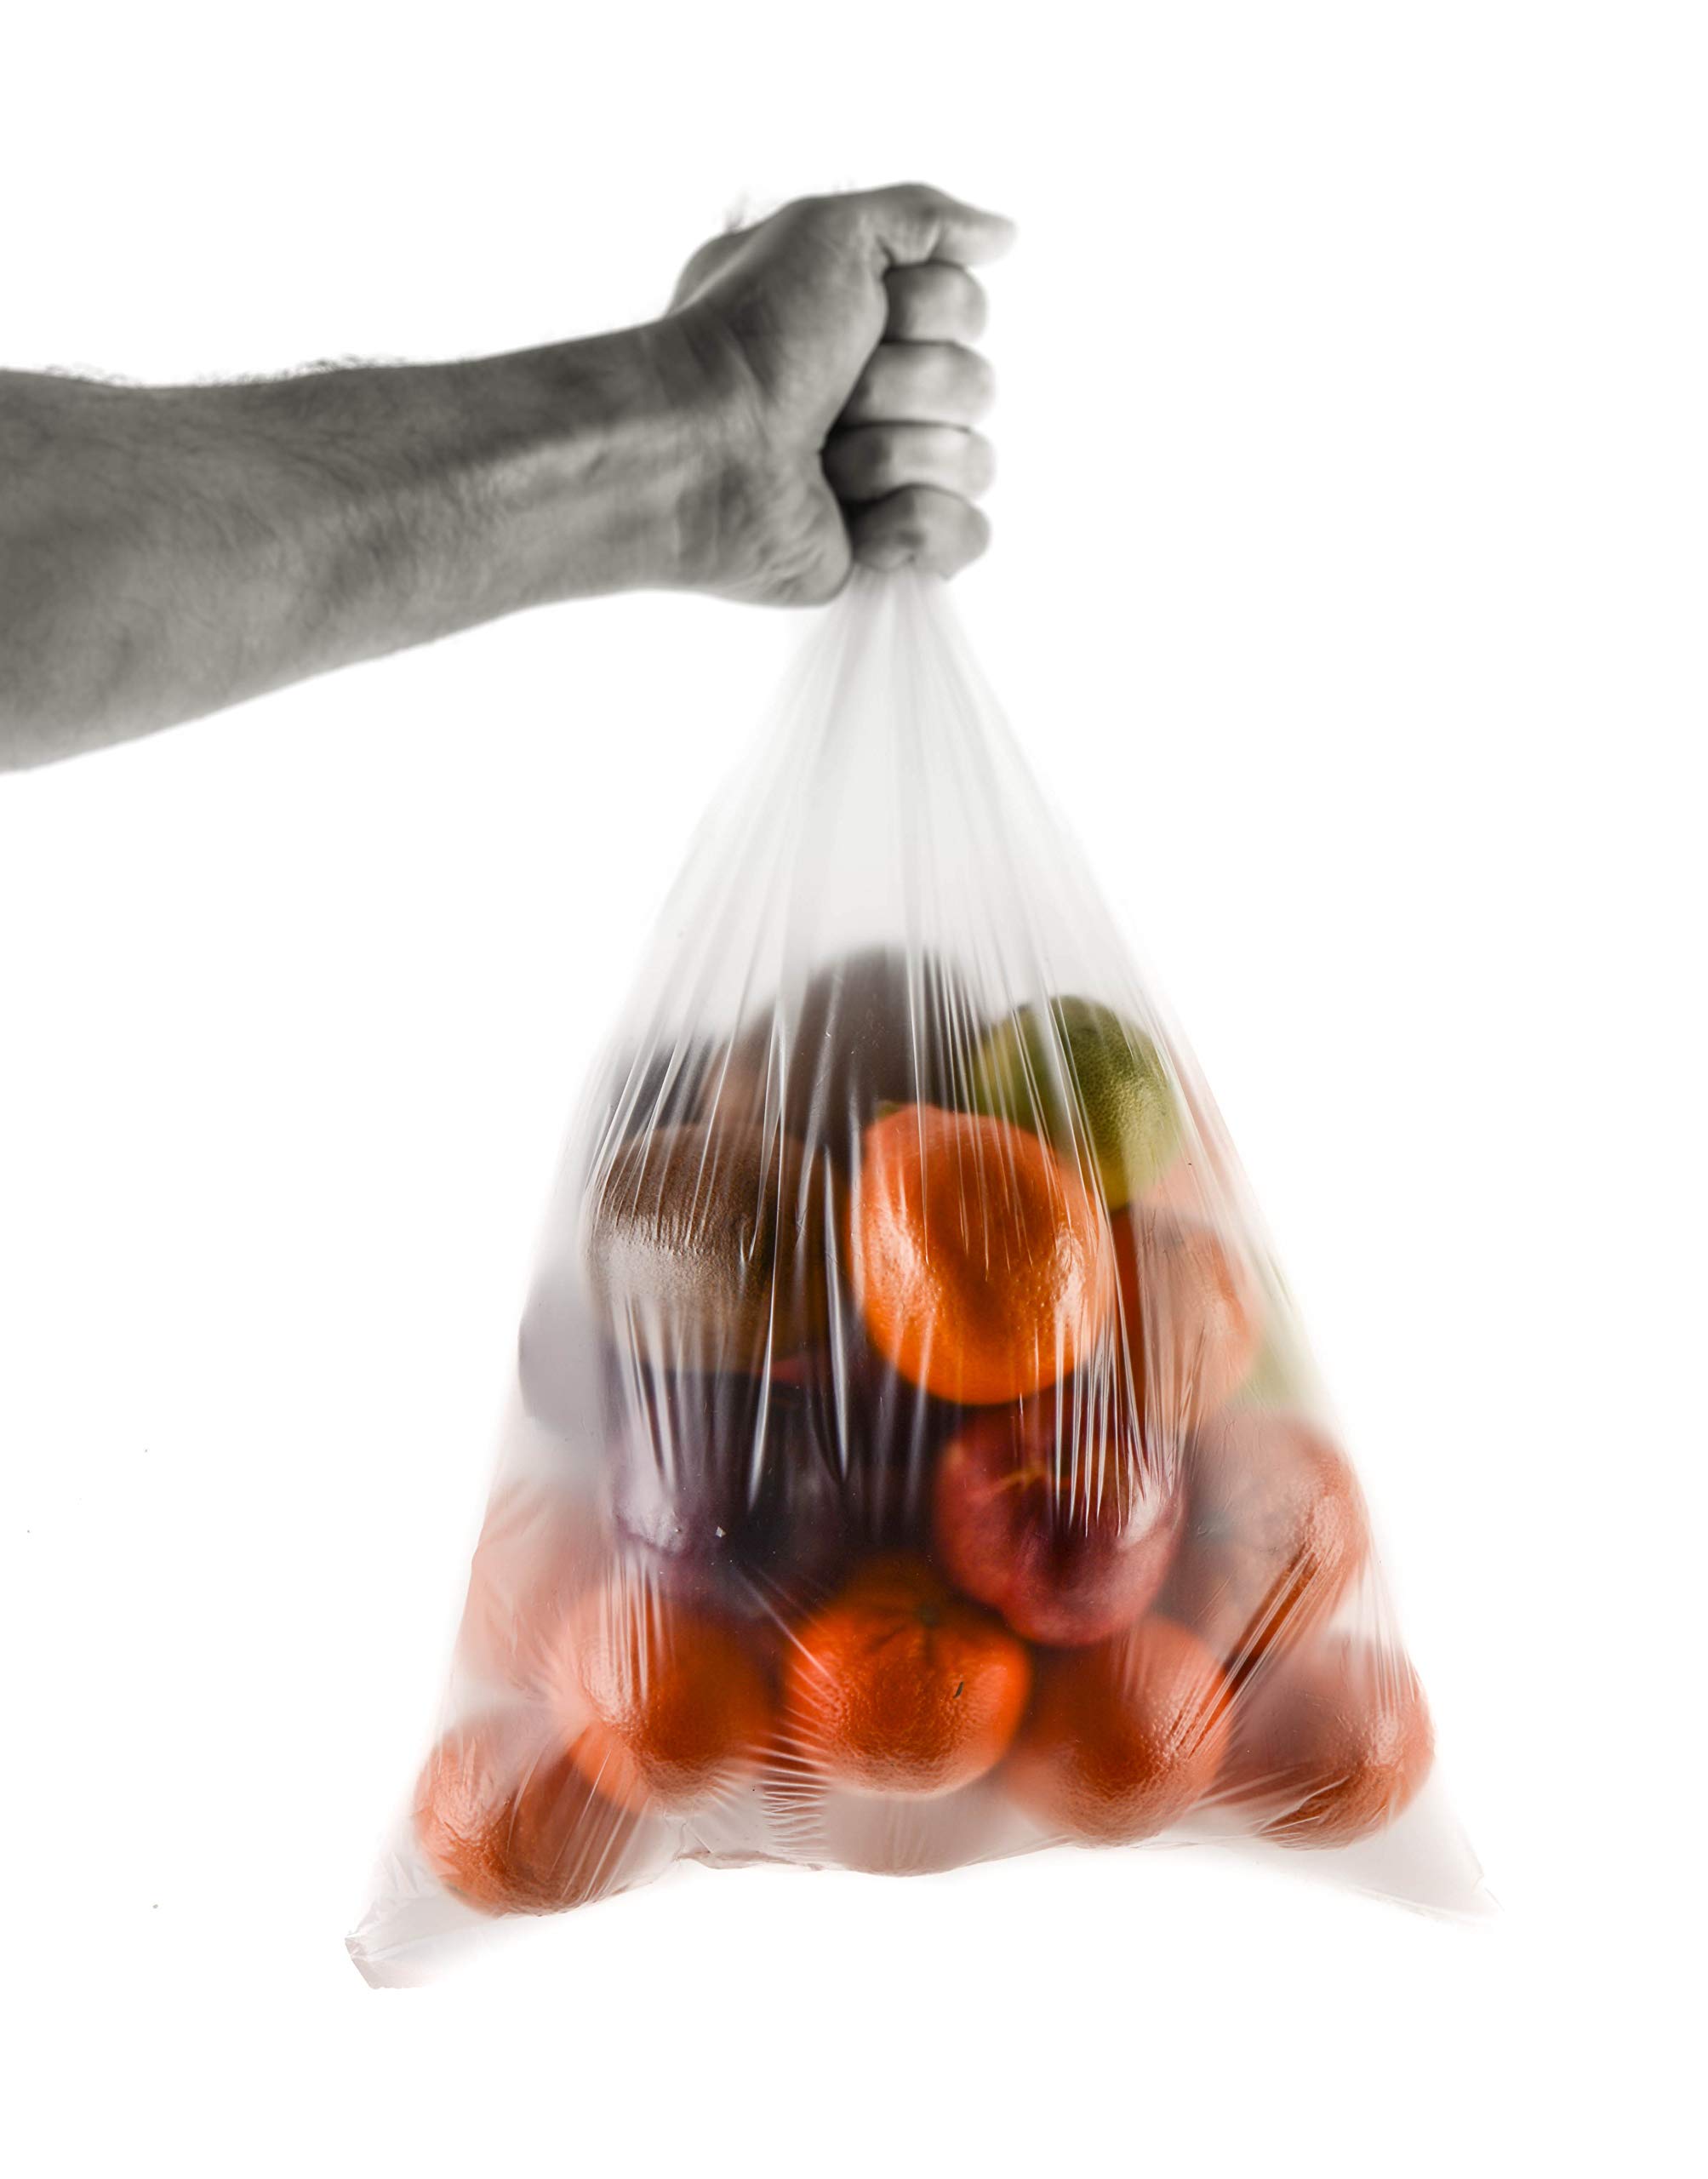 EcoQuality 18" x 24" Plastic Produce Bags on a Roll 250 Bags/Roll - Food Storage Bags, Clear Plastic Bags for Vegetables, Food, Fruits, Bread, Pet Waste Bags, Grocery Bags, Supermarket Bags (12)